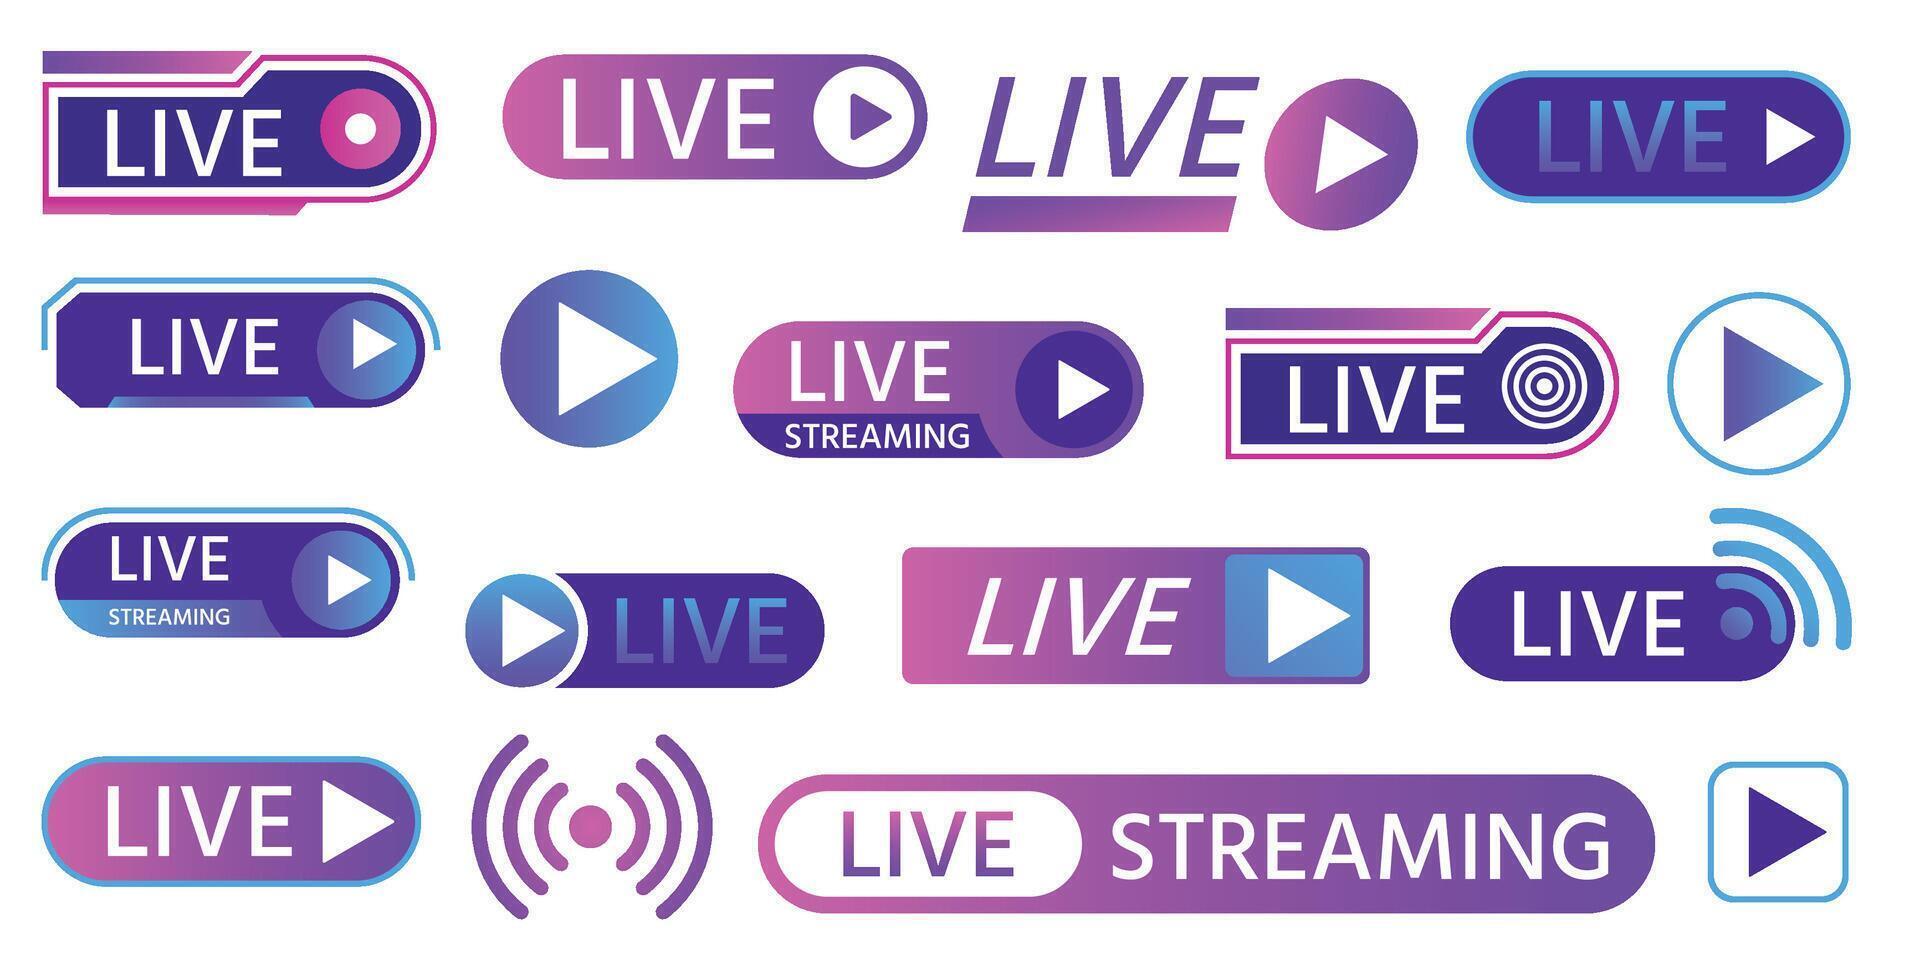 Live icons for game streaming, tv broadcasting, show or news on air. Buttons and bars for social media, online living video event vector set